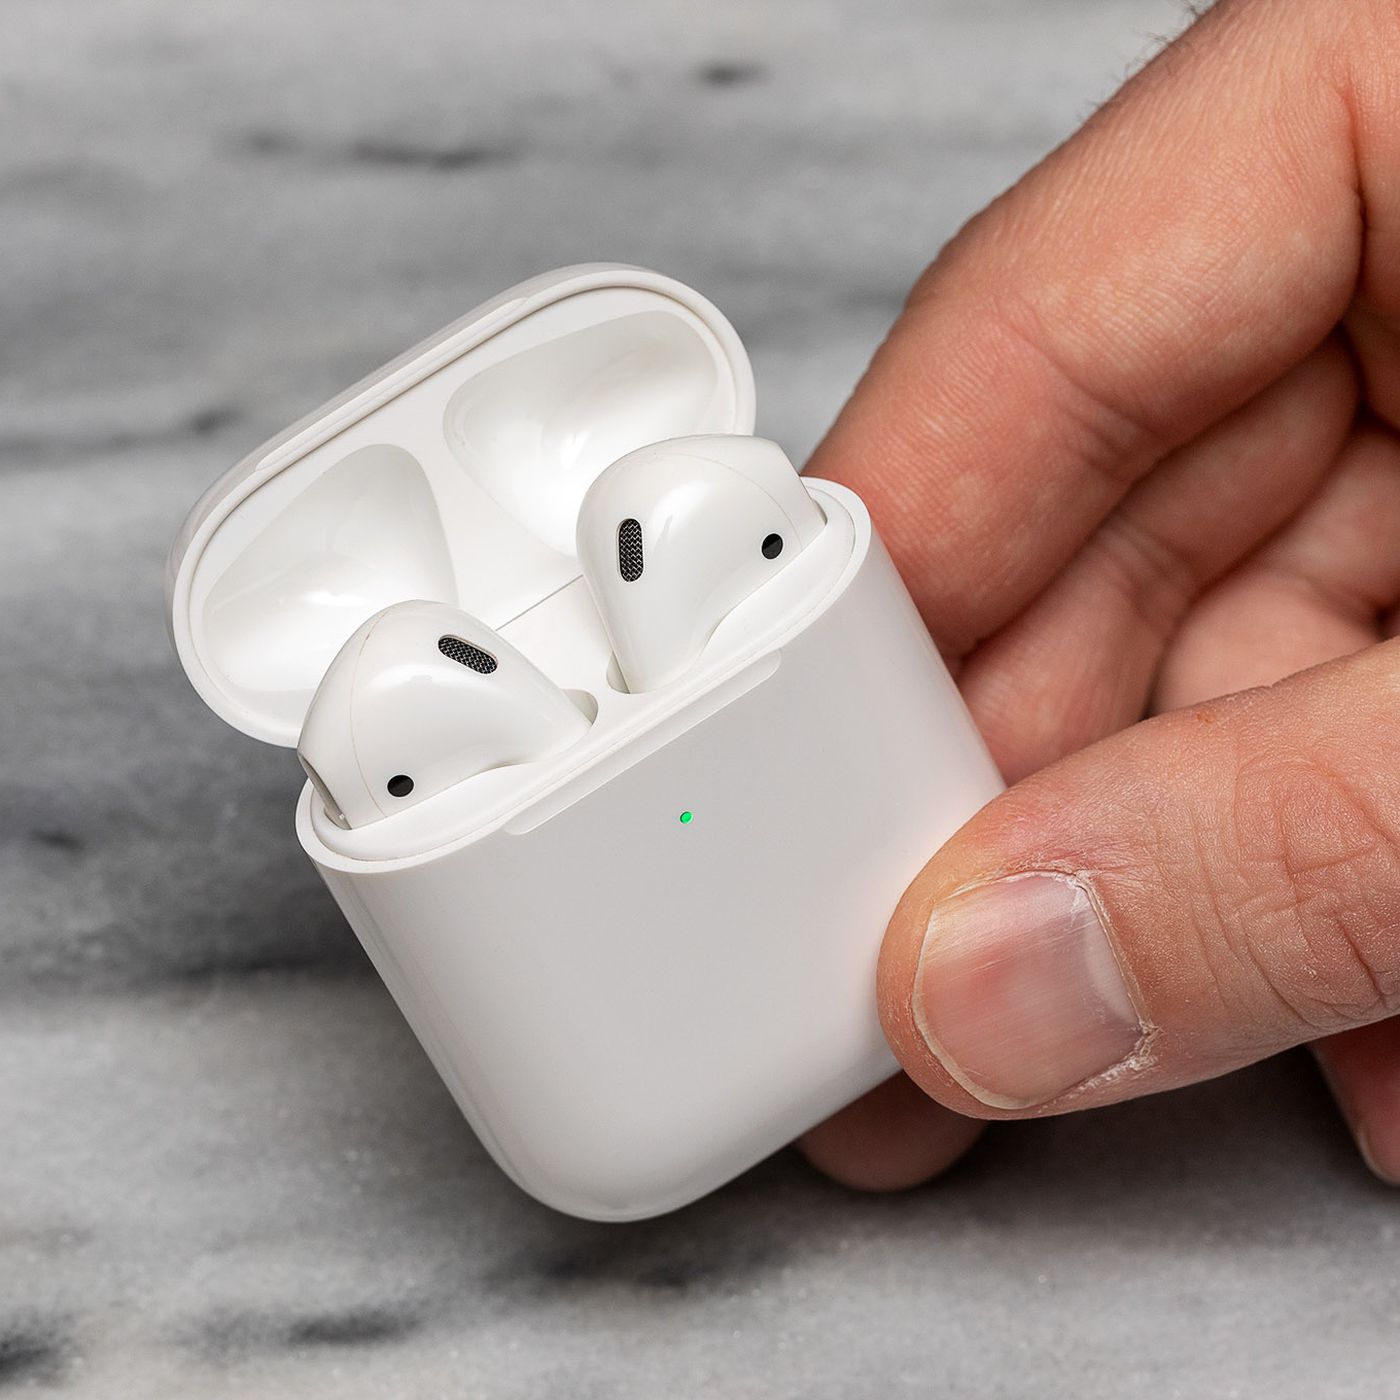 Apple AirPods 2 review: even more wireless - The Verge